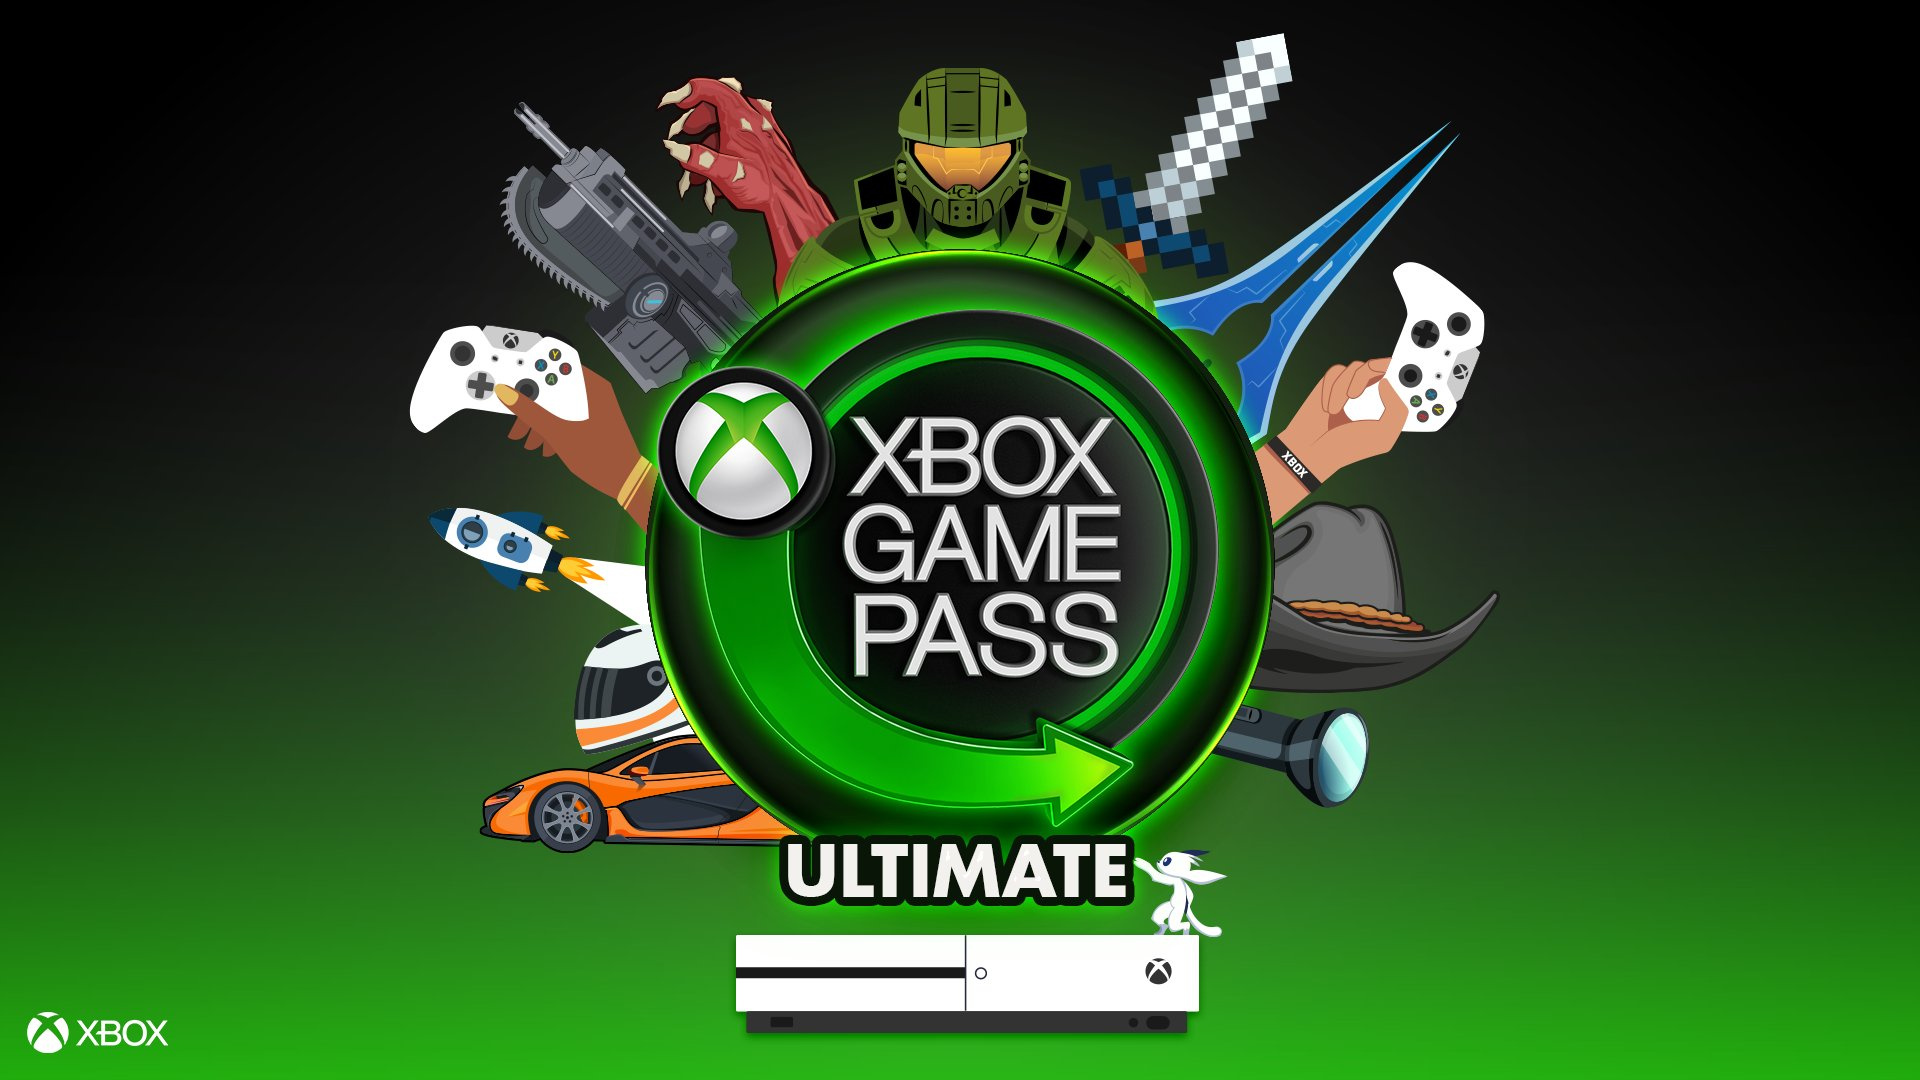 xbox game pass ultimate vs live gold